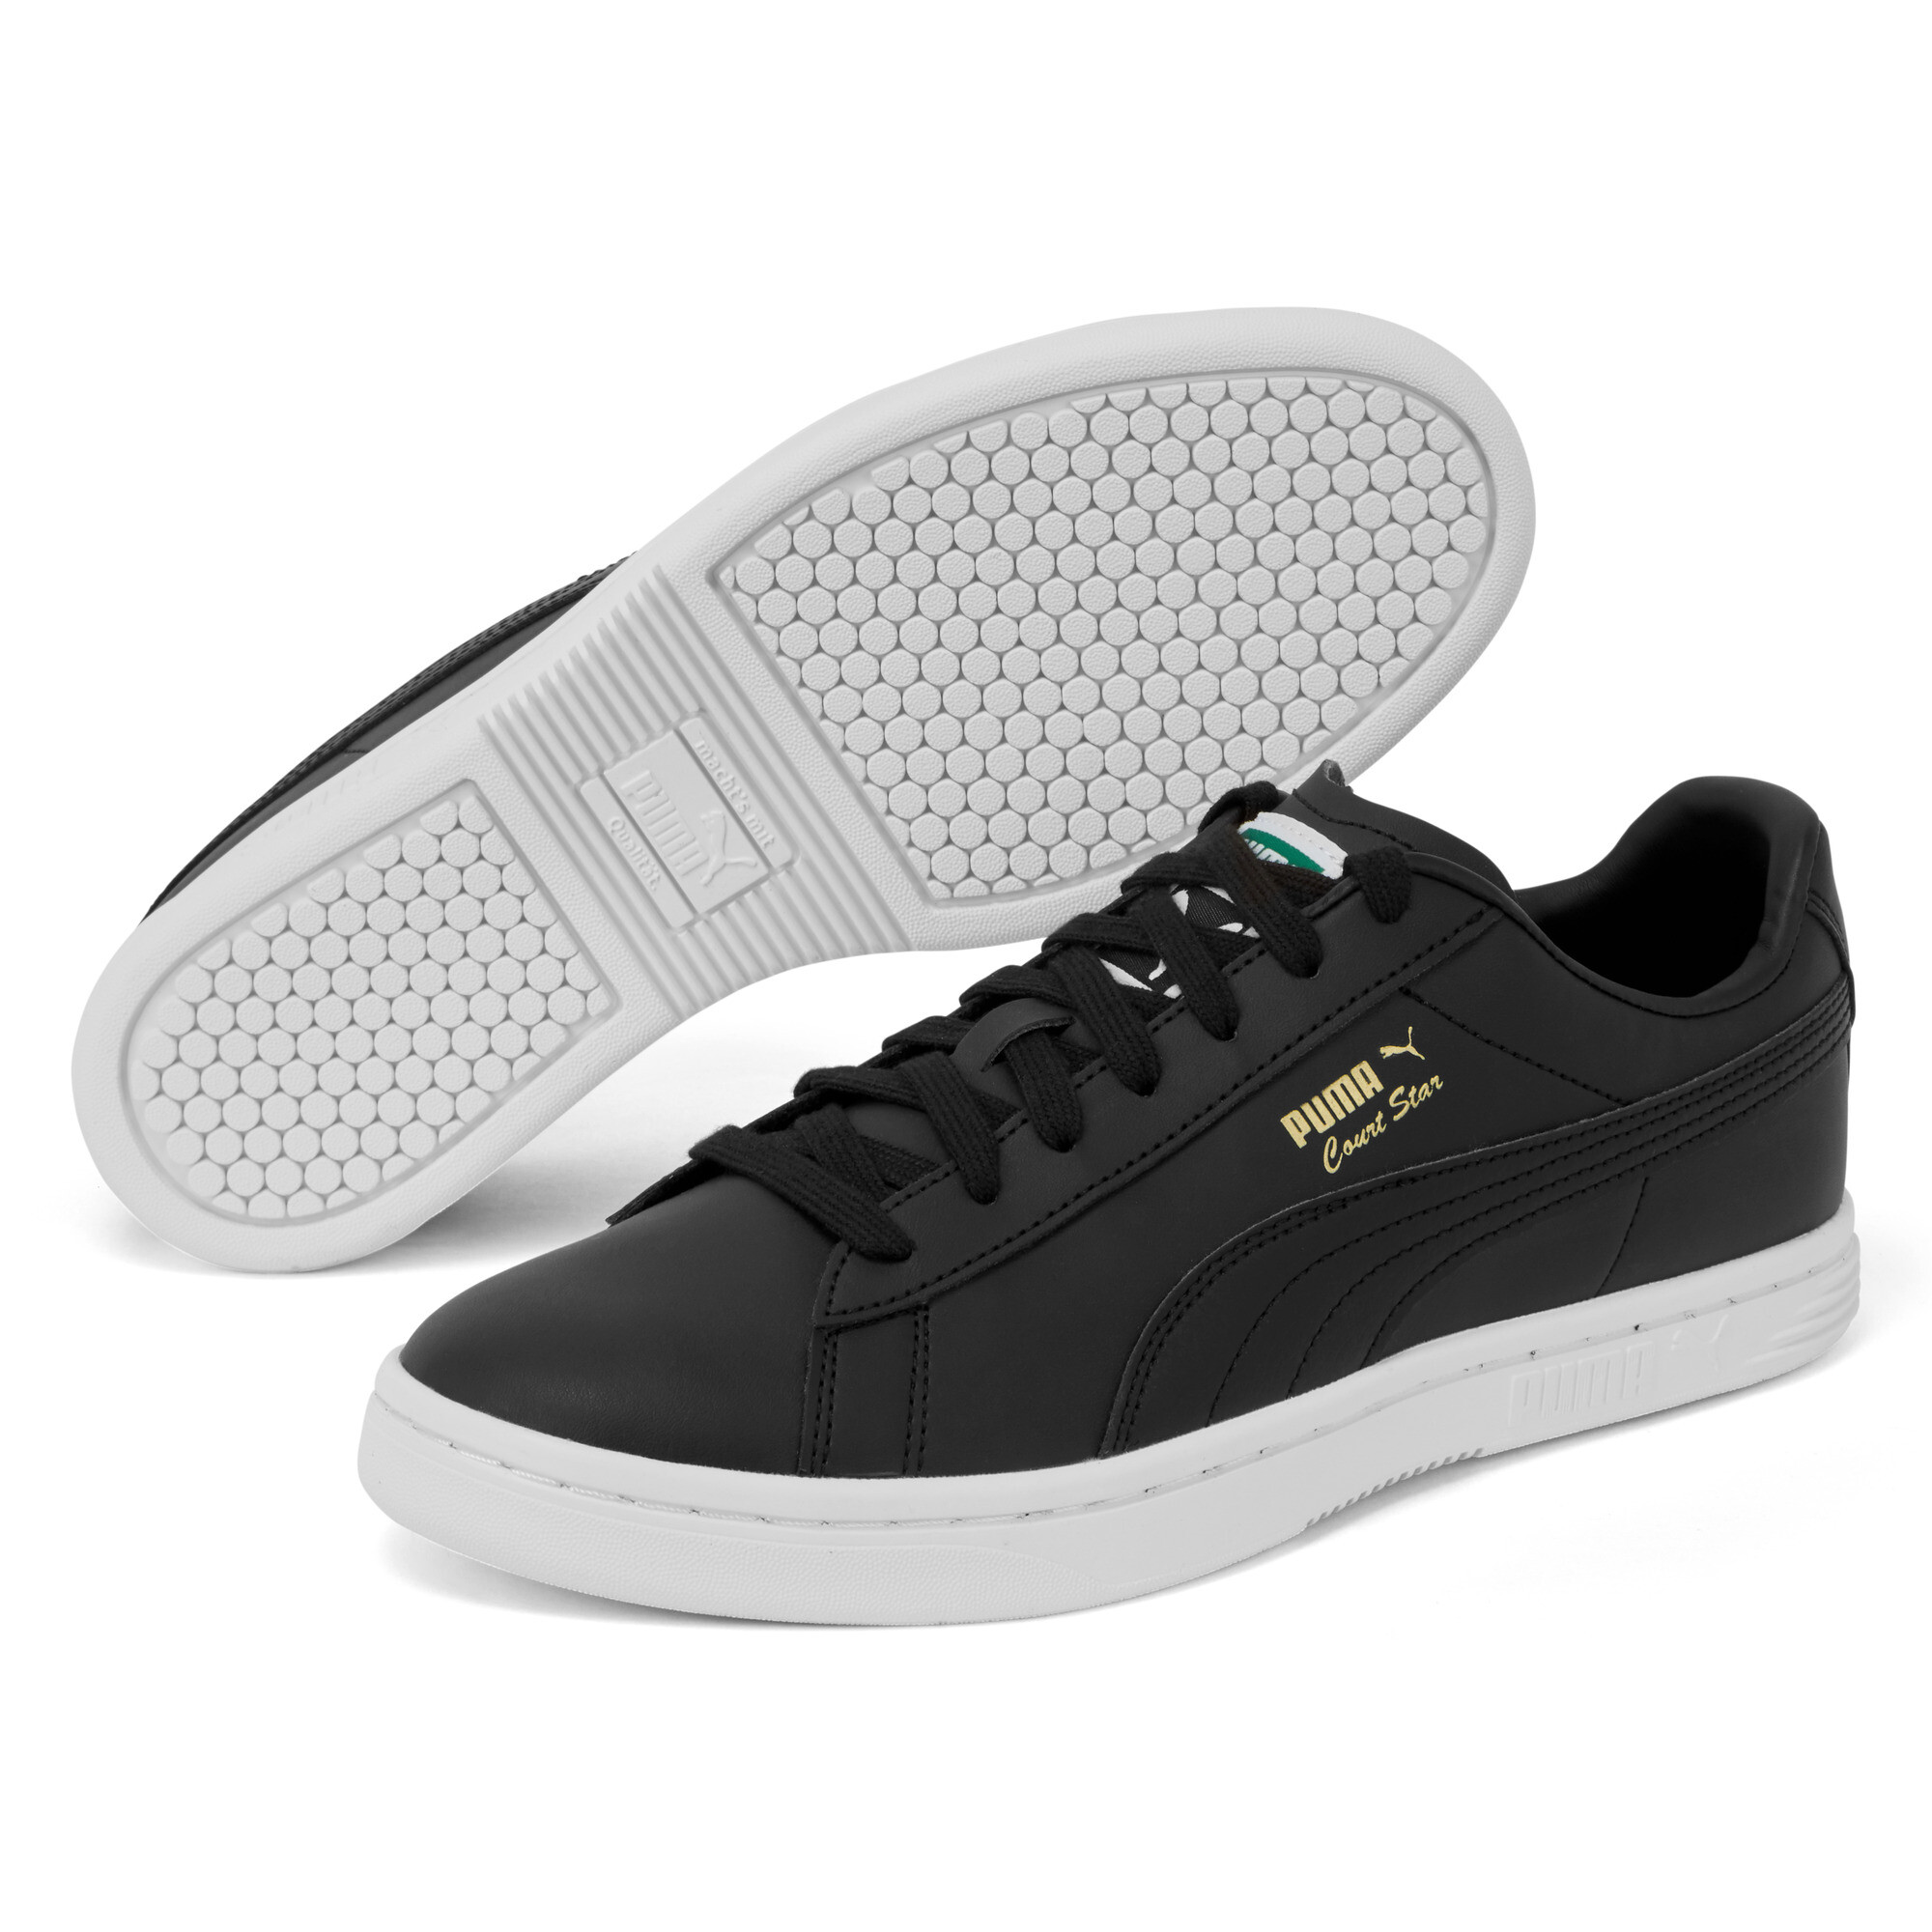 PUMA Court Star SL Trainers Sport Shoes Lace Up Low Top Unisex | eBay